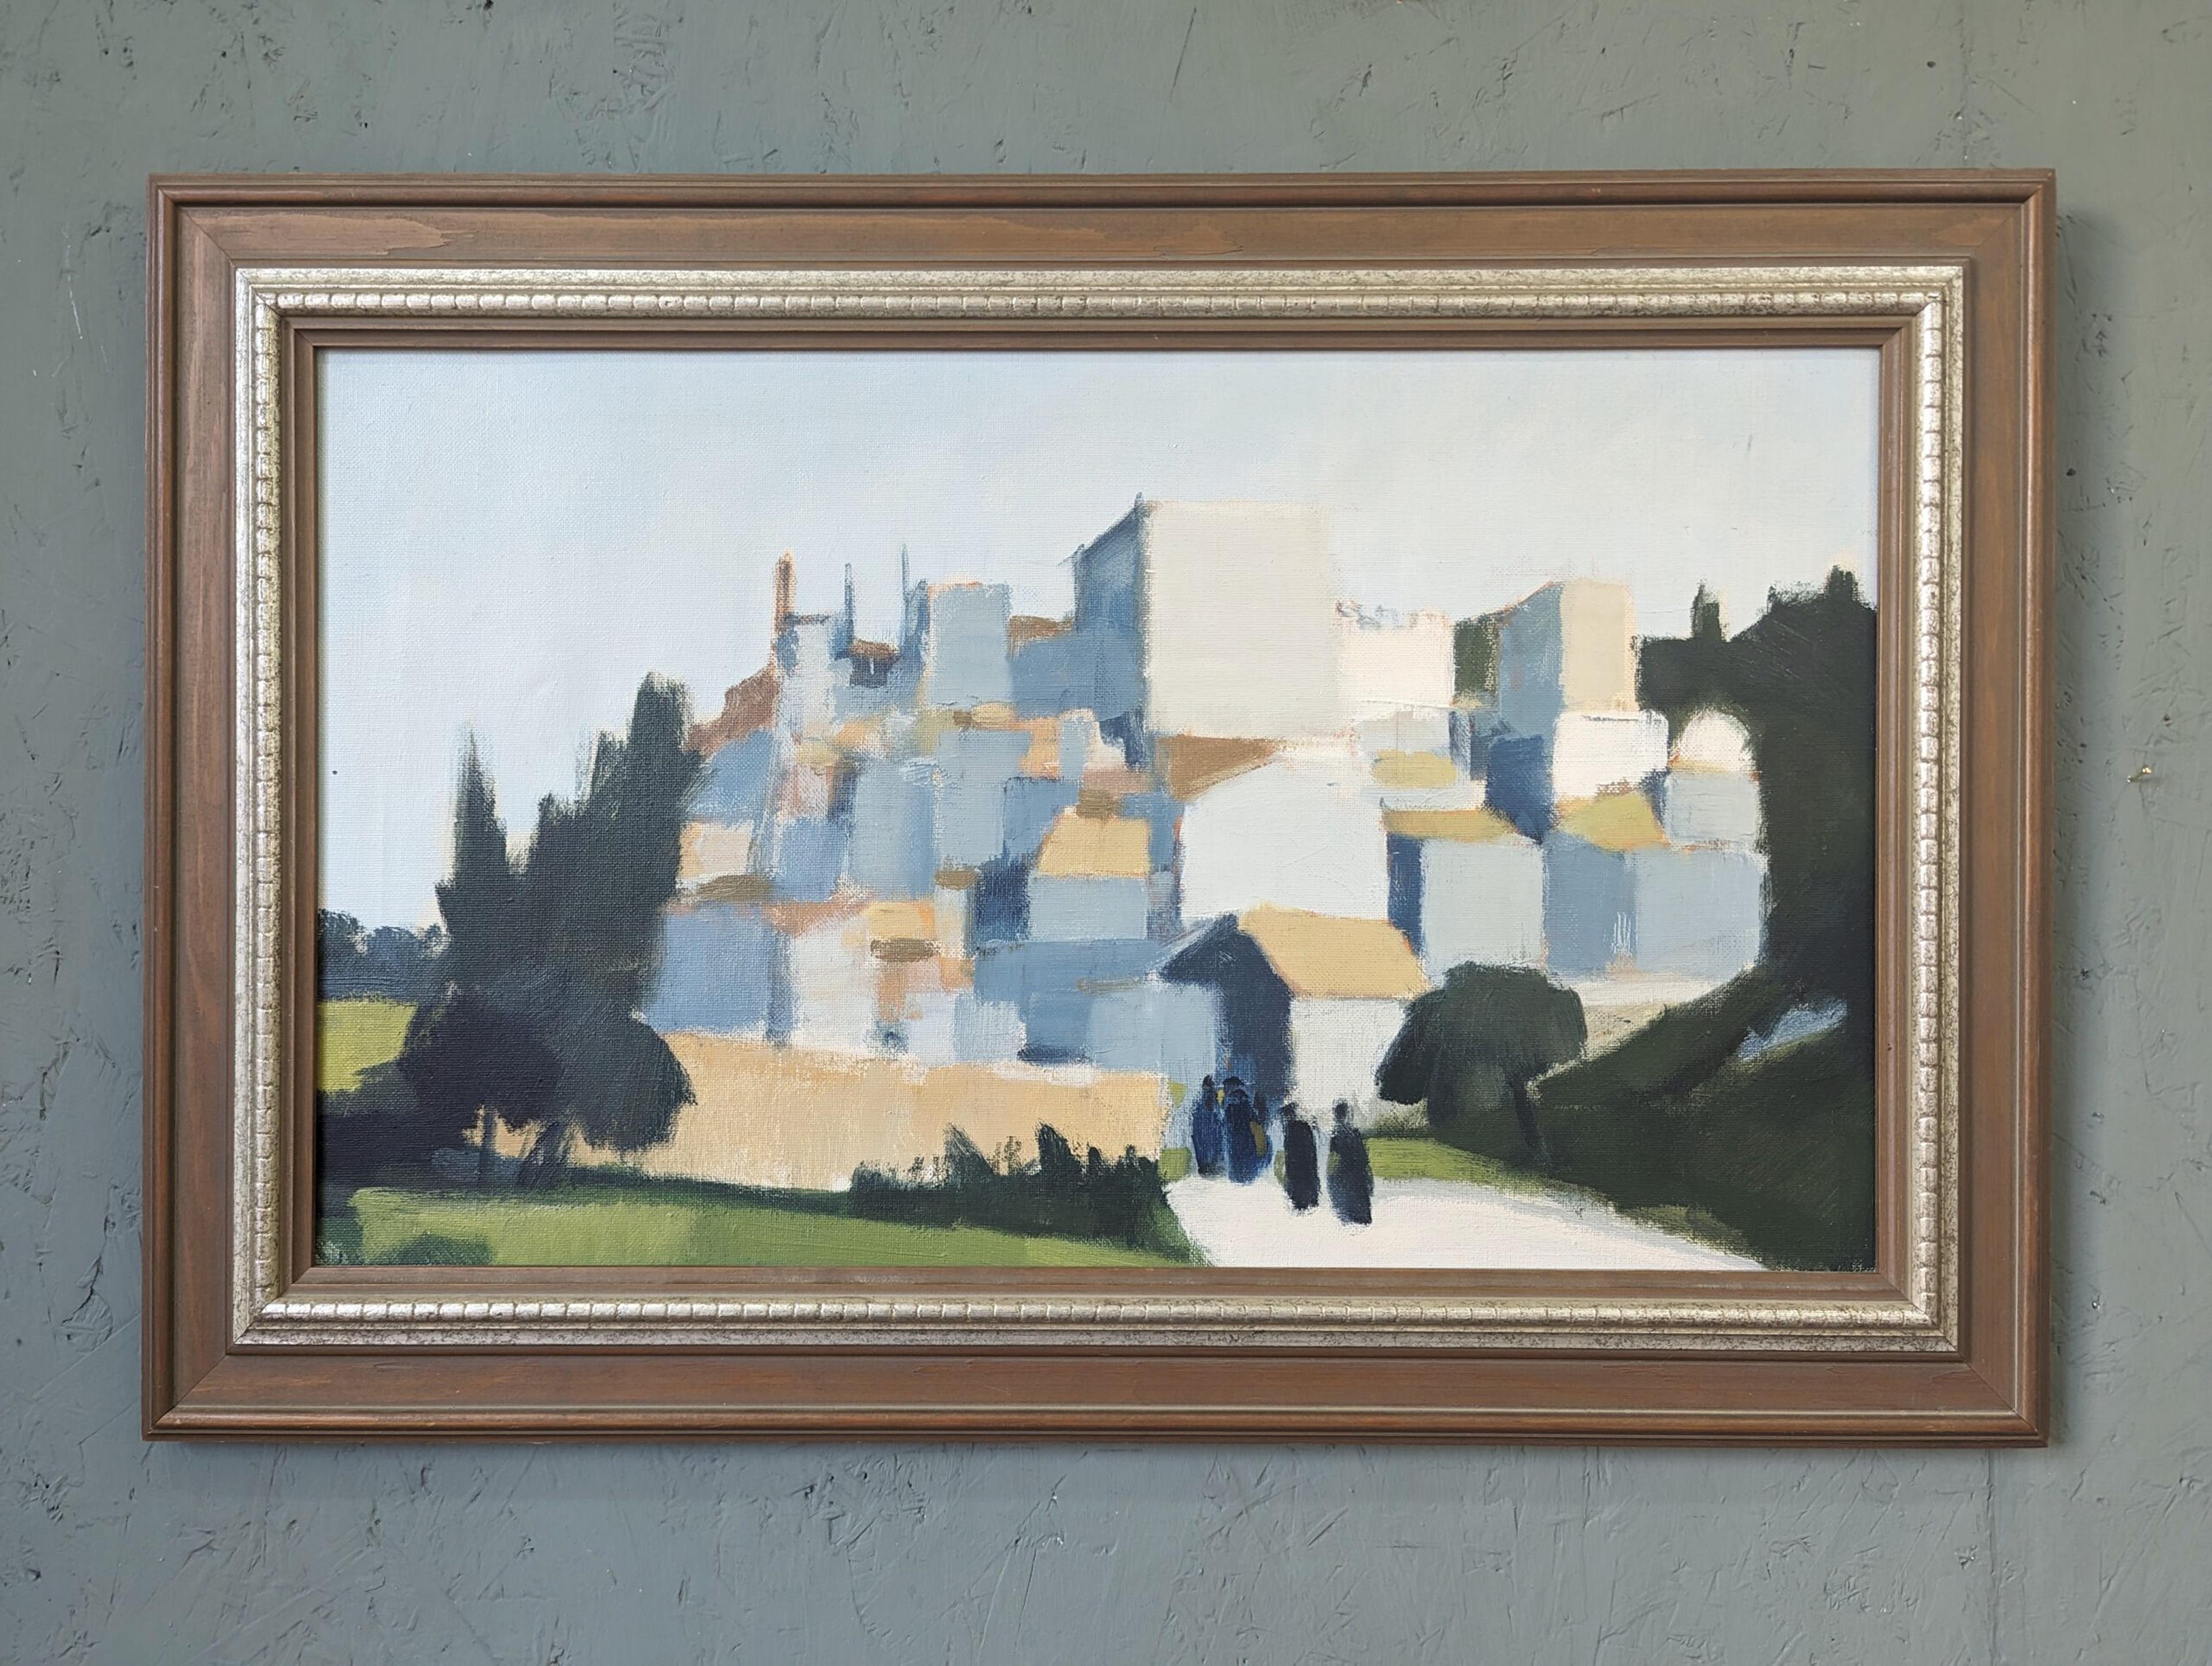 CITY STROLL
Size: 44 x 66 cm (including frame)
Oil on Canvas

A very pleasant modernist oil street scene composition, painted by the established Swedish artist Stig Wernheden (1921-1997), whose works have been represented at public collections in